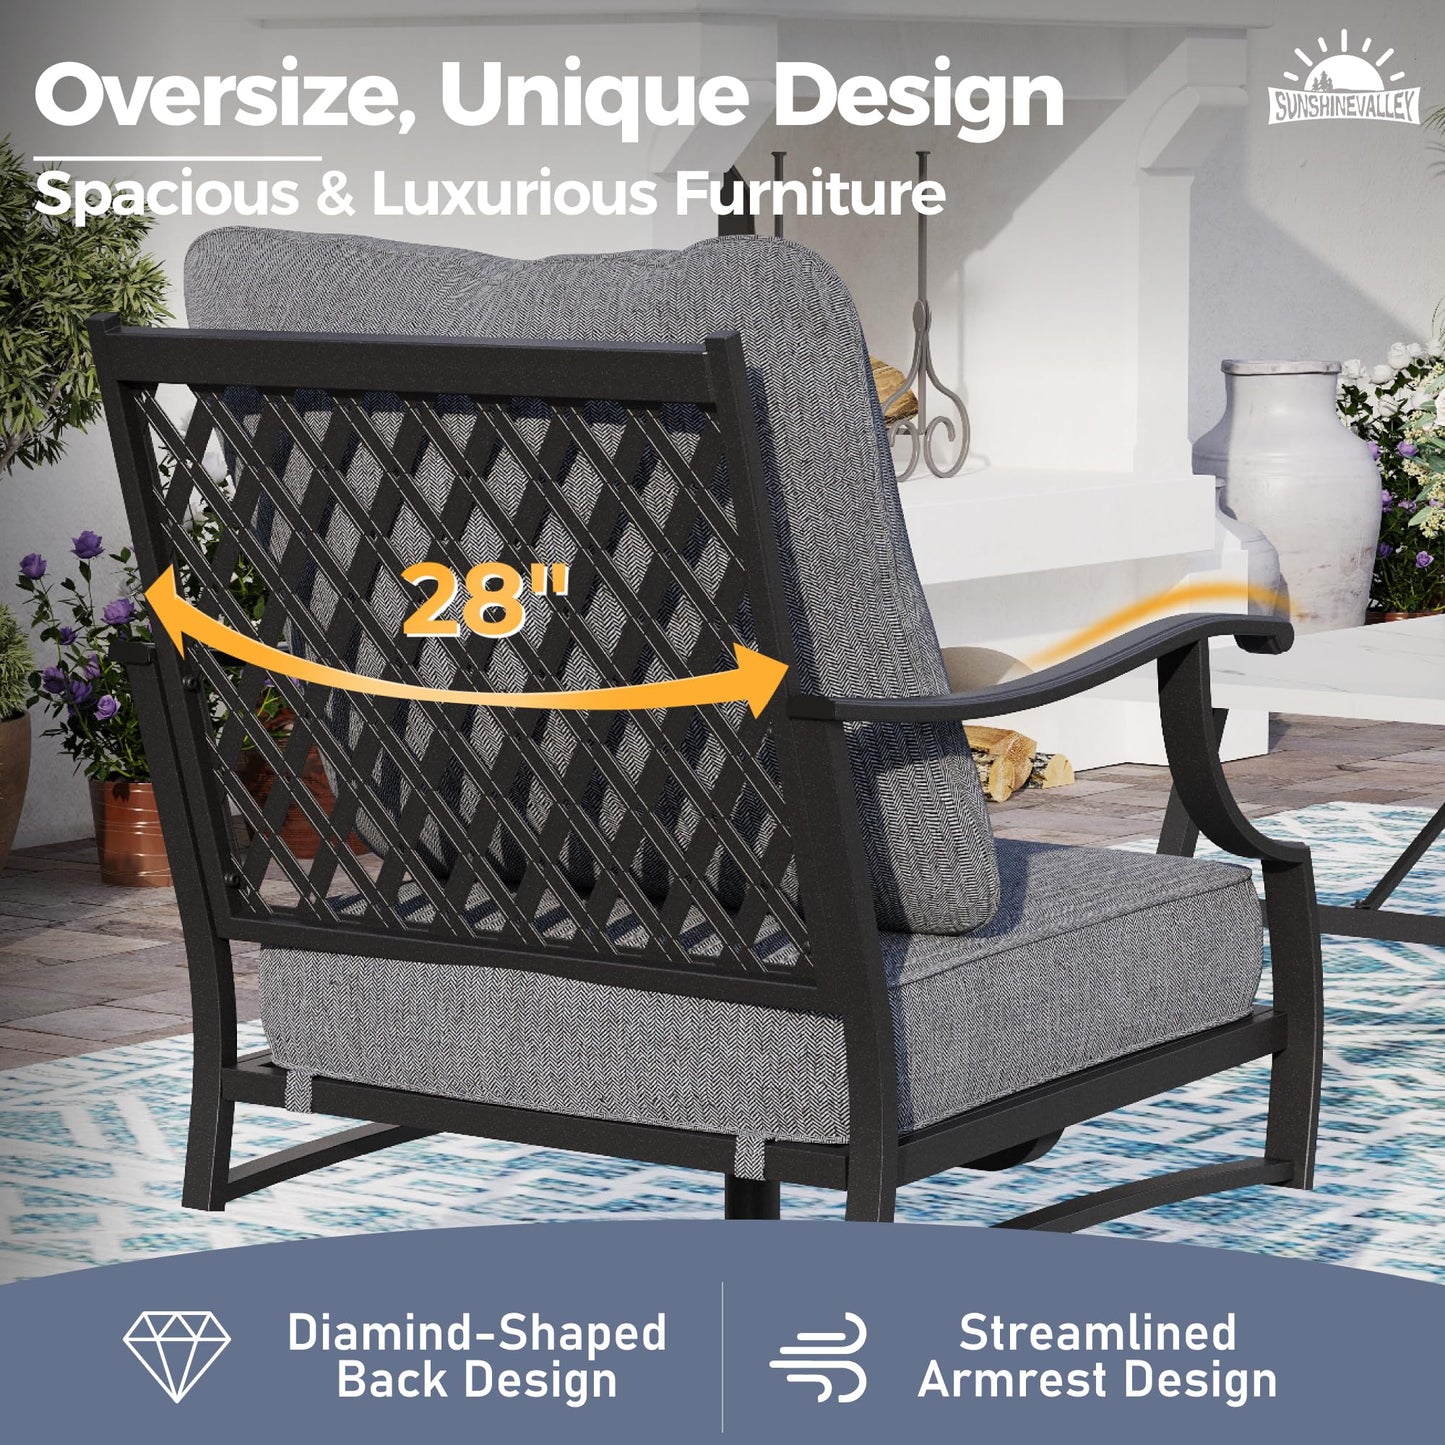 SUNSHINE VALLEY 4 Piece Metal Outdoor Patio Furniture Set, Patio Conversation Sets 1 3-seater Sofa, 2 Swivel Chair with 5.75" Extra Thick Cushion and Coffee Table, Black Frame Backyard Furniture, Gray